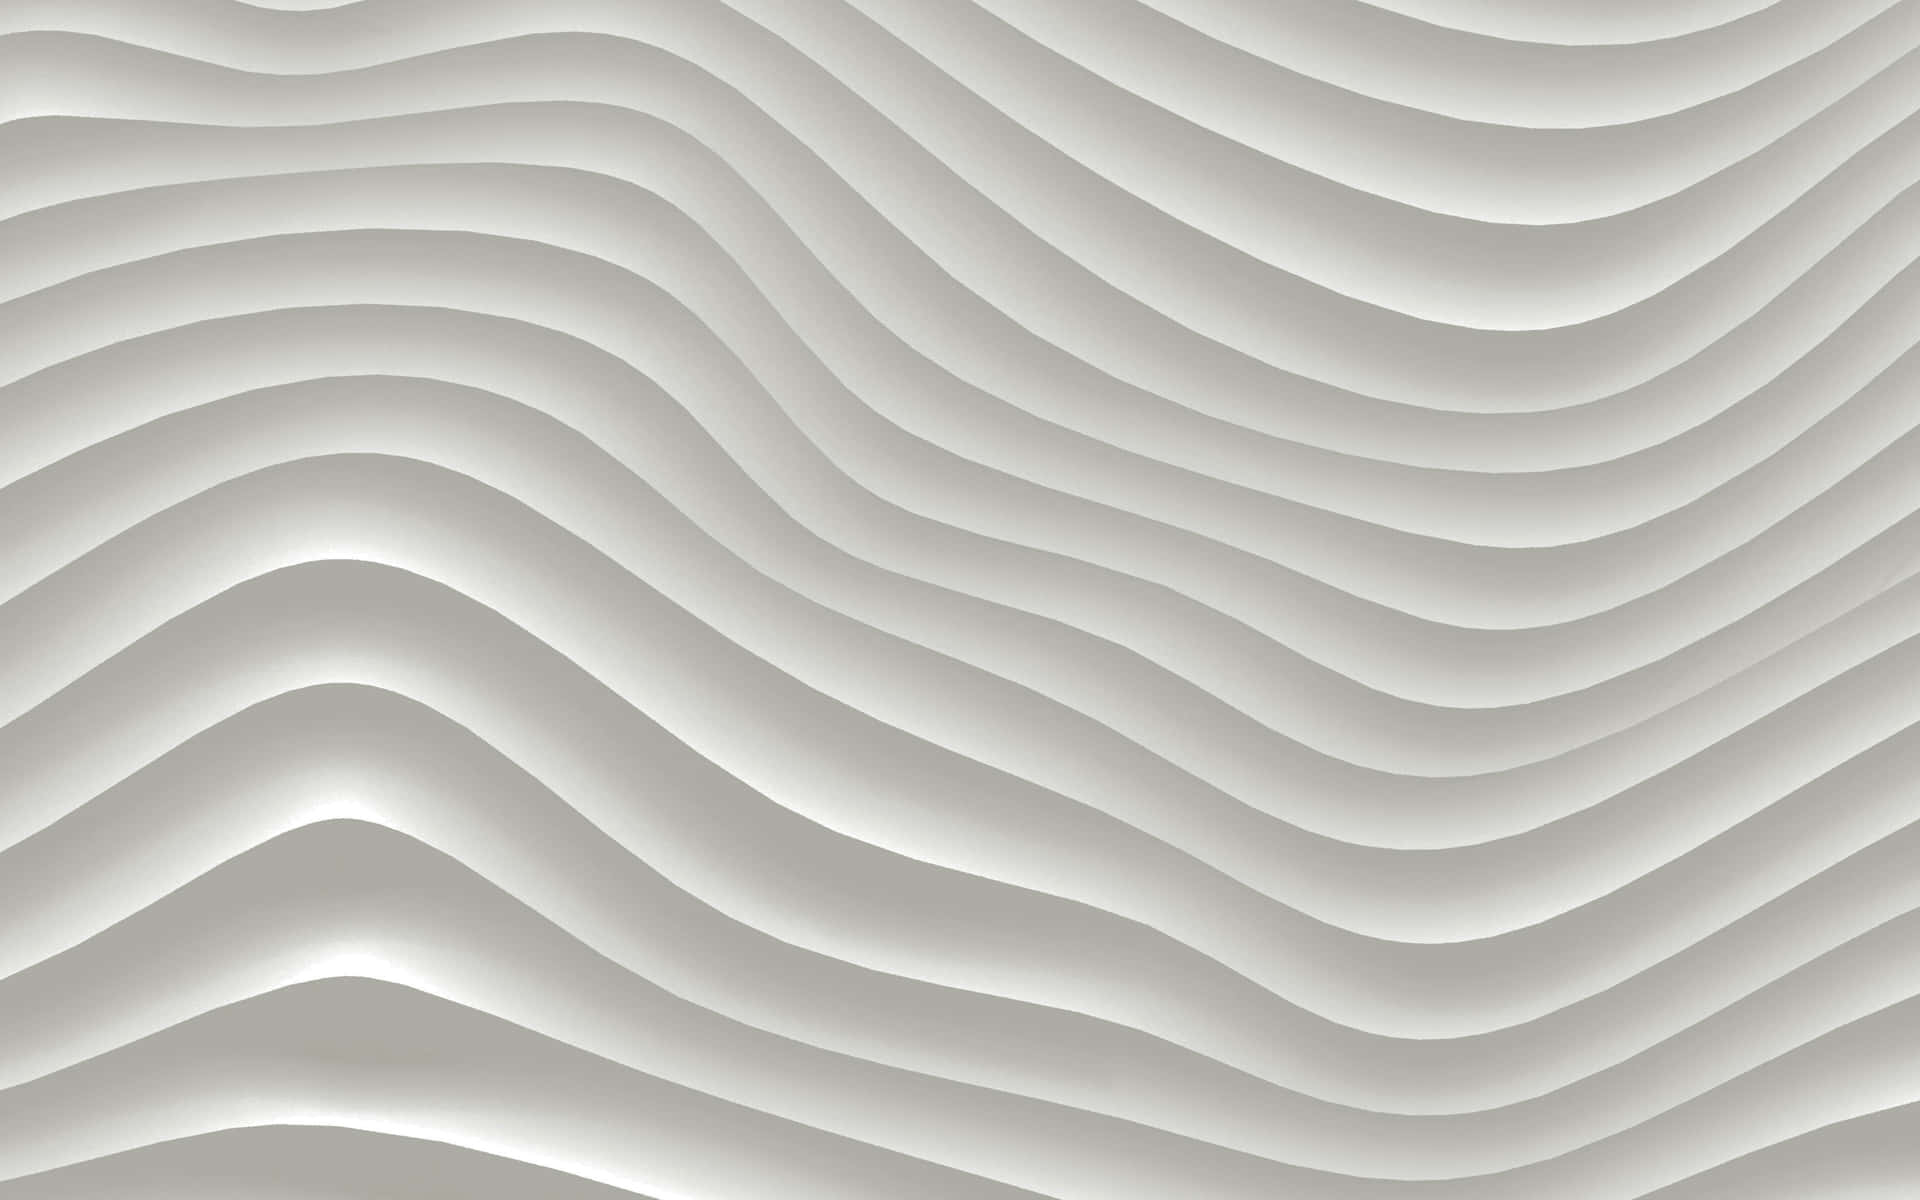 Big Wavy Carved Lines White Texture Background